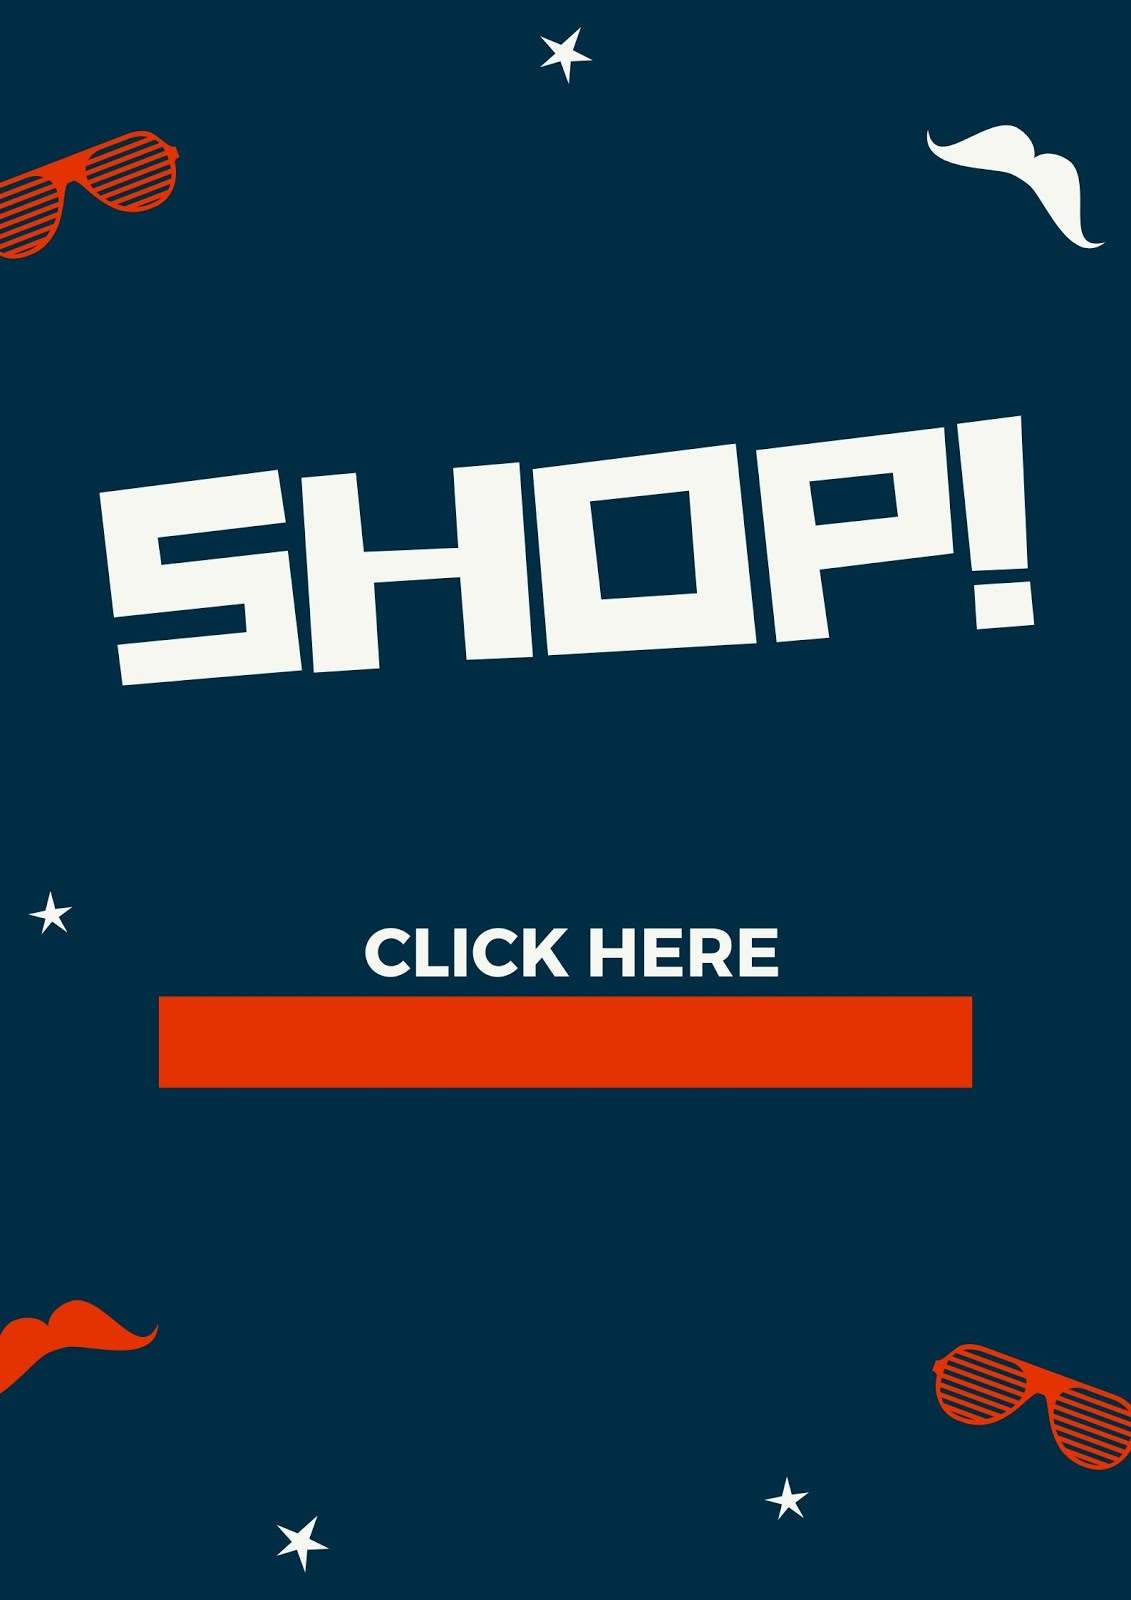 Shop for Items!